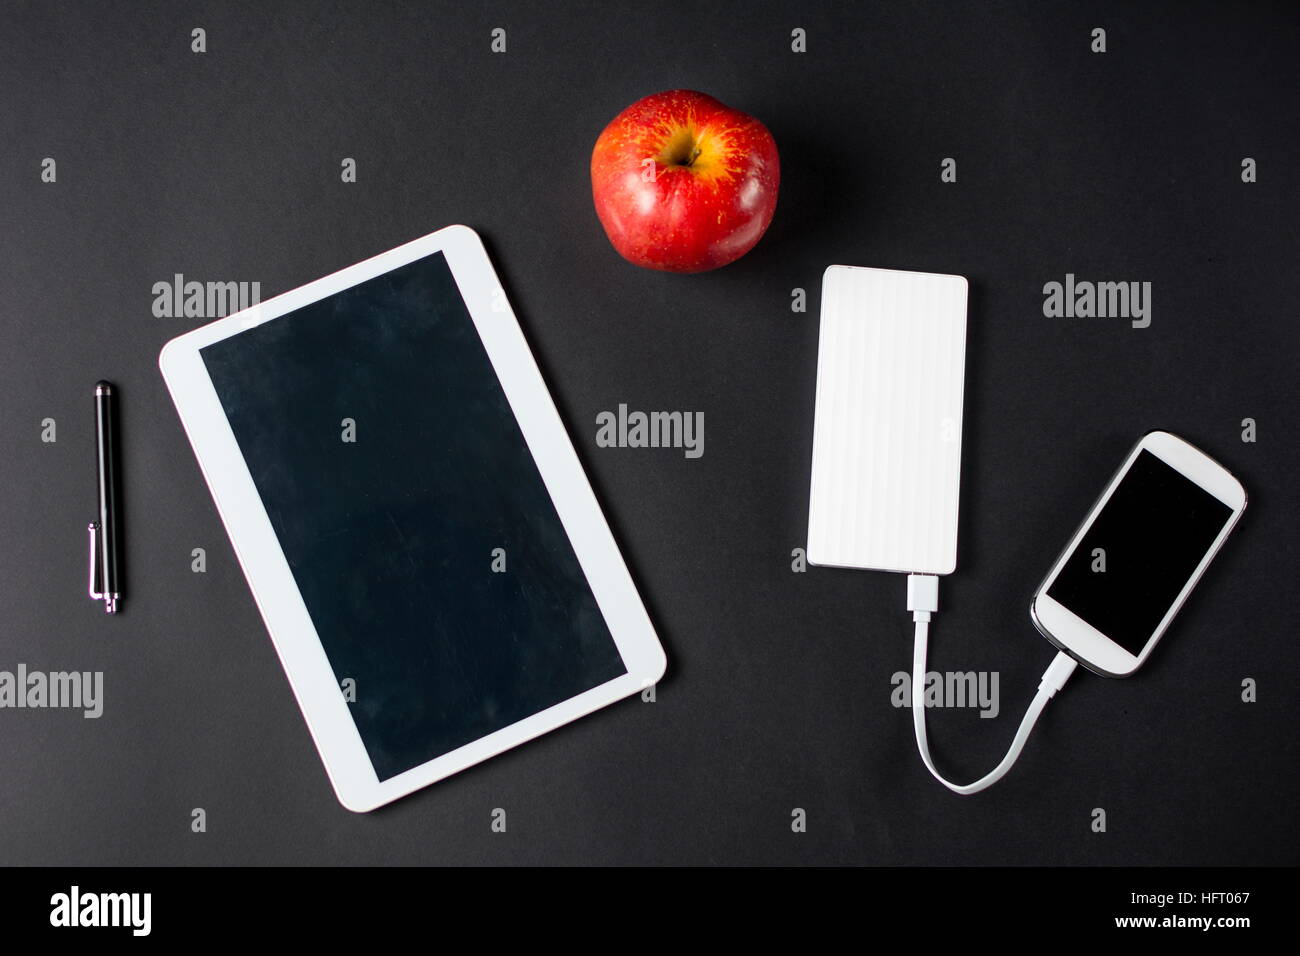 Red apple and white electronic devices. Snack at work Stock Photo